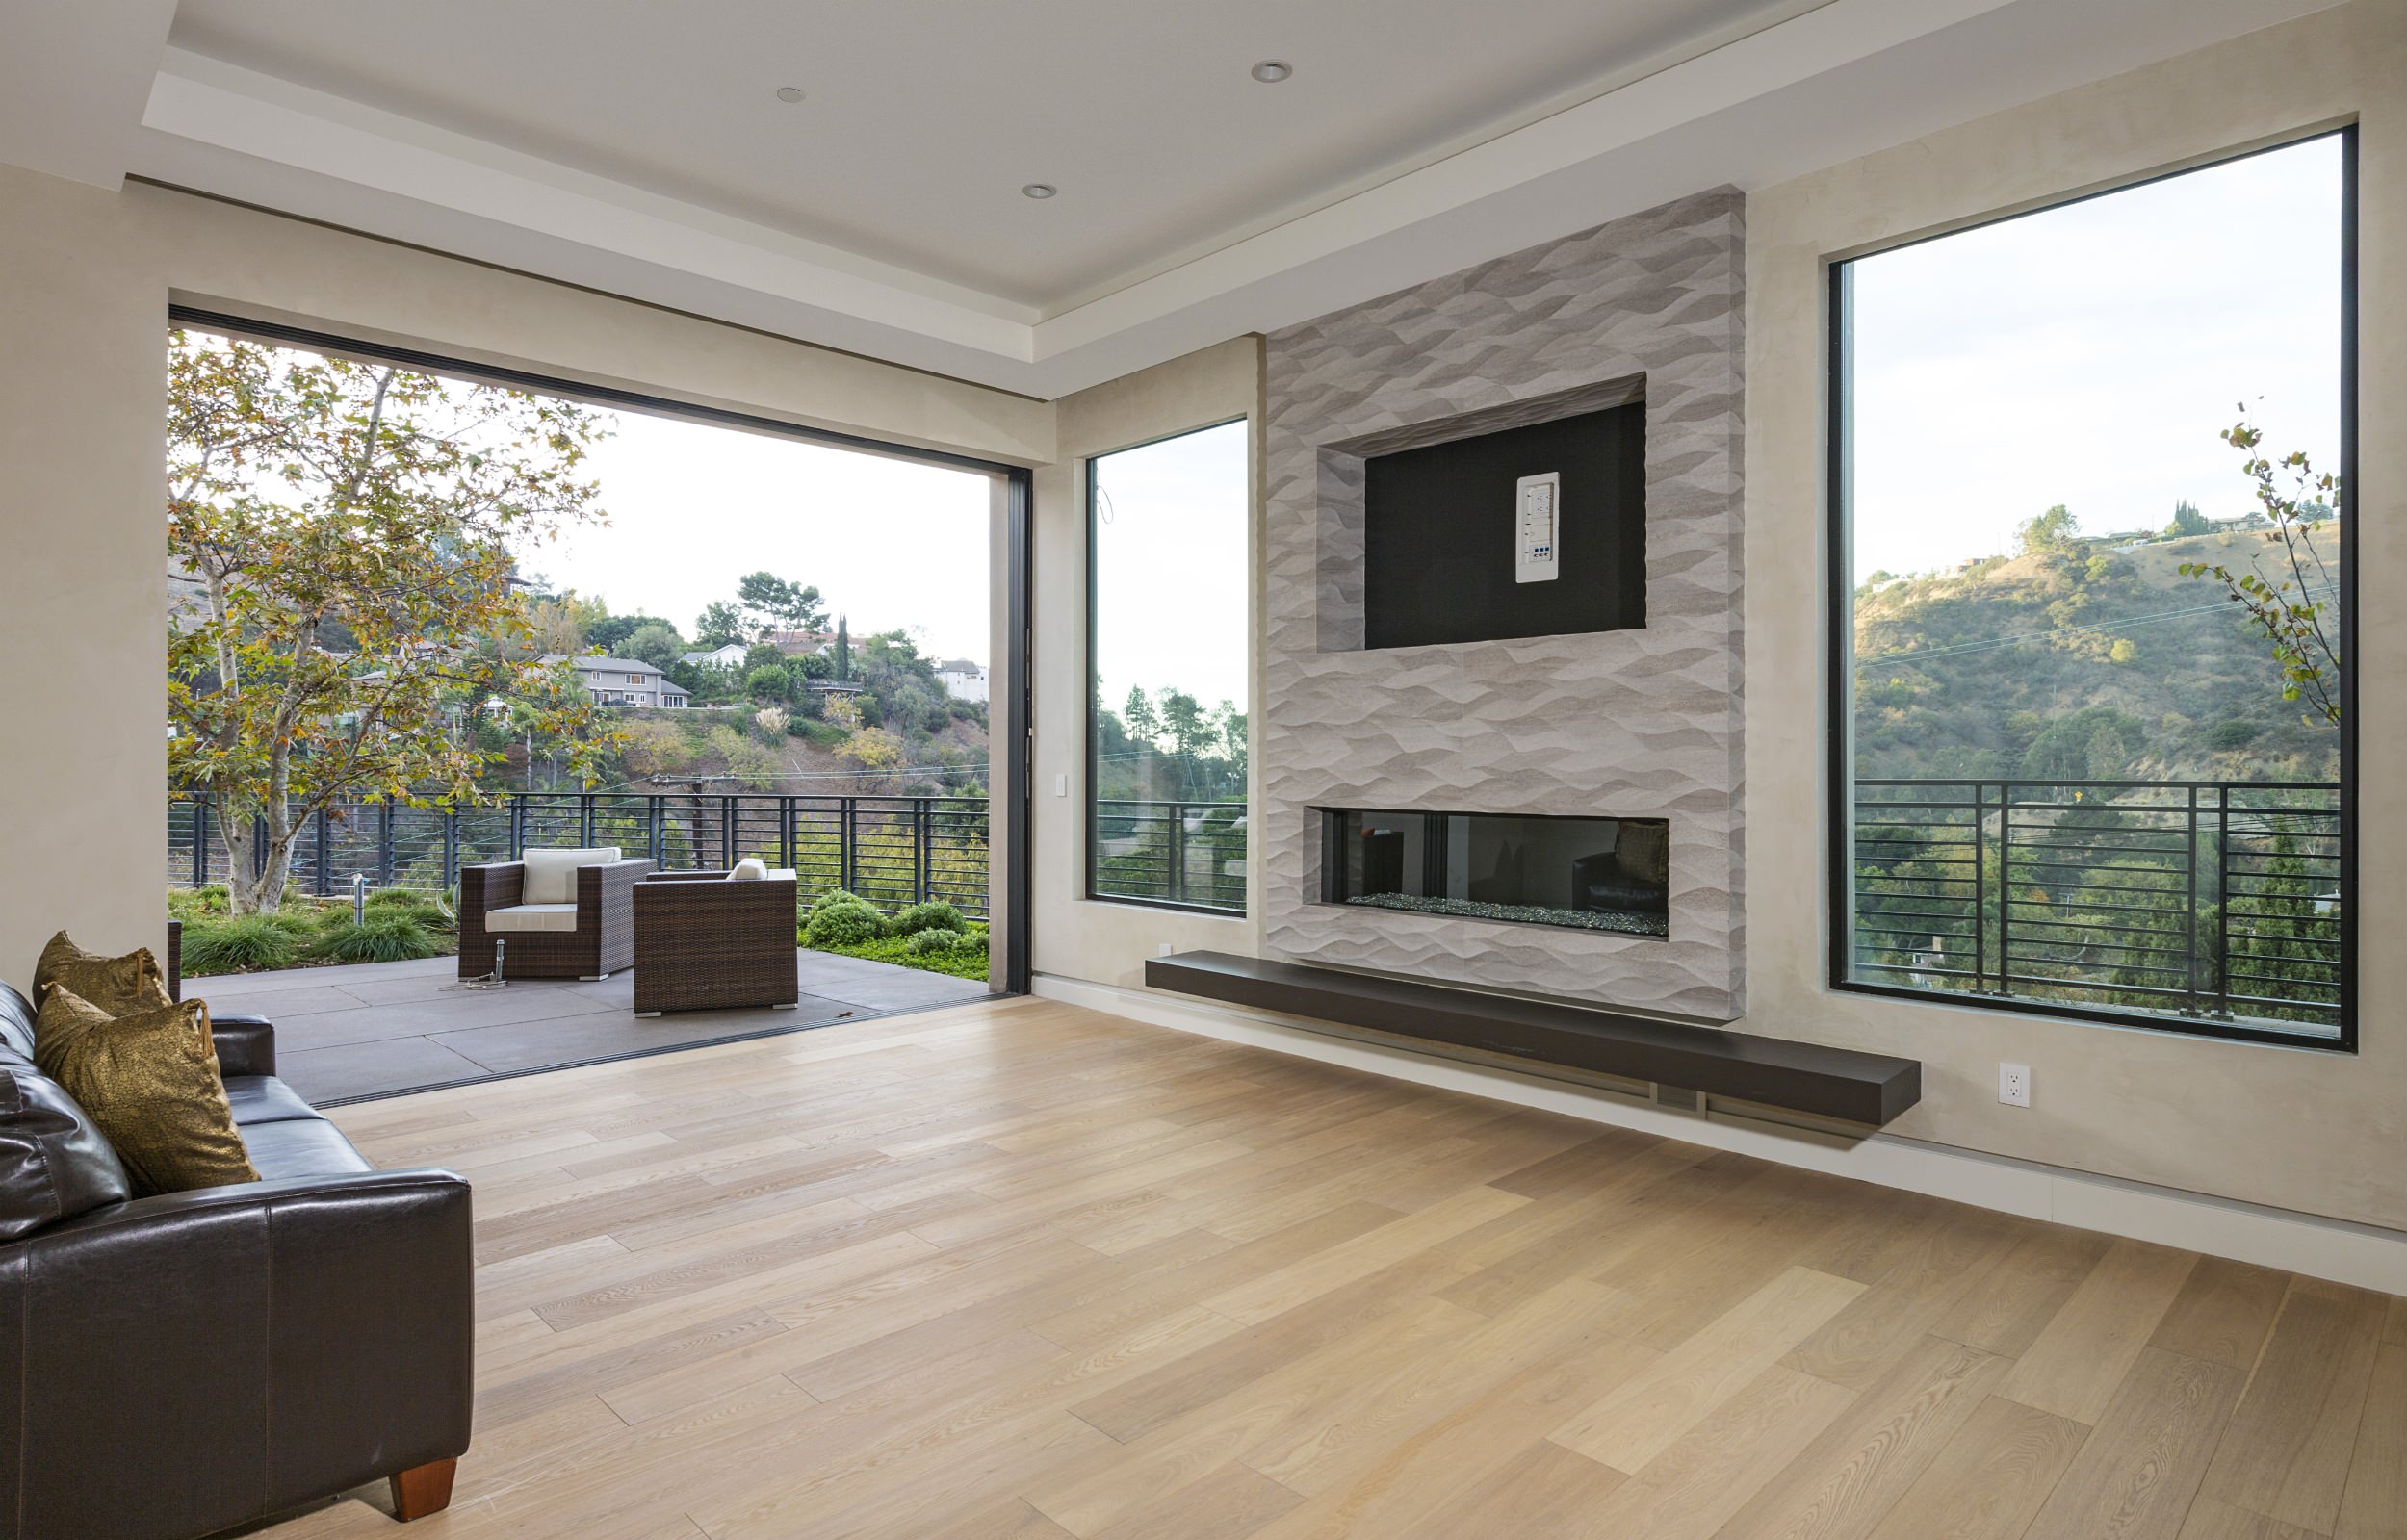 75 Modern Living Room with a Media Wall Ideas You'll Love - August, 2023 |  Houzz